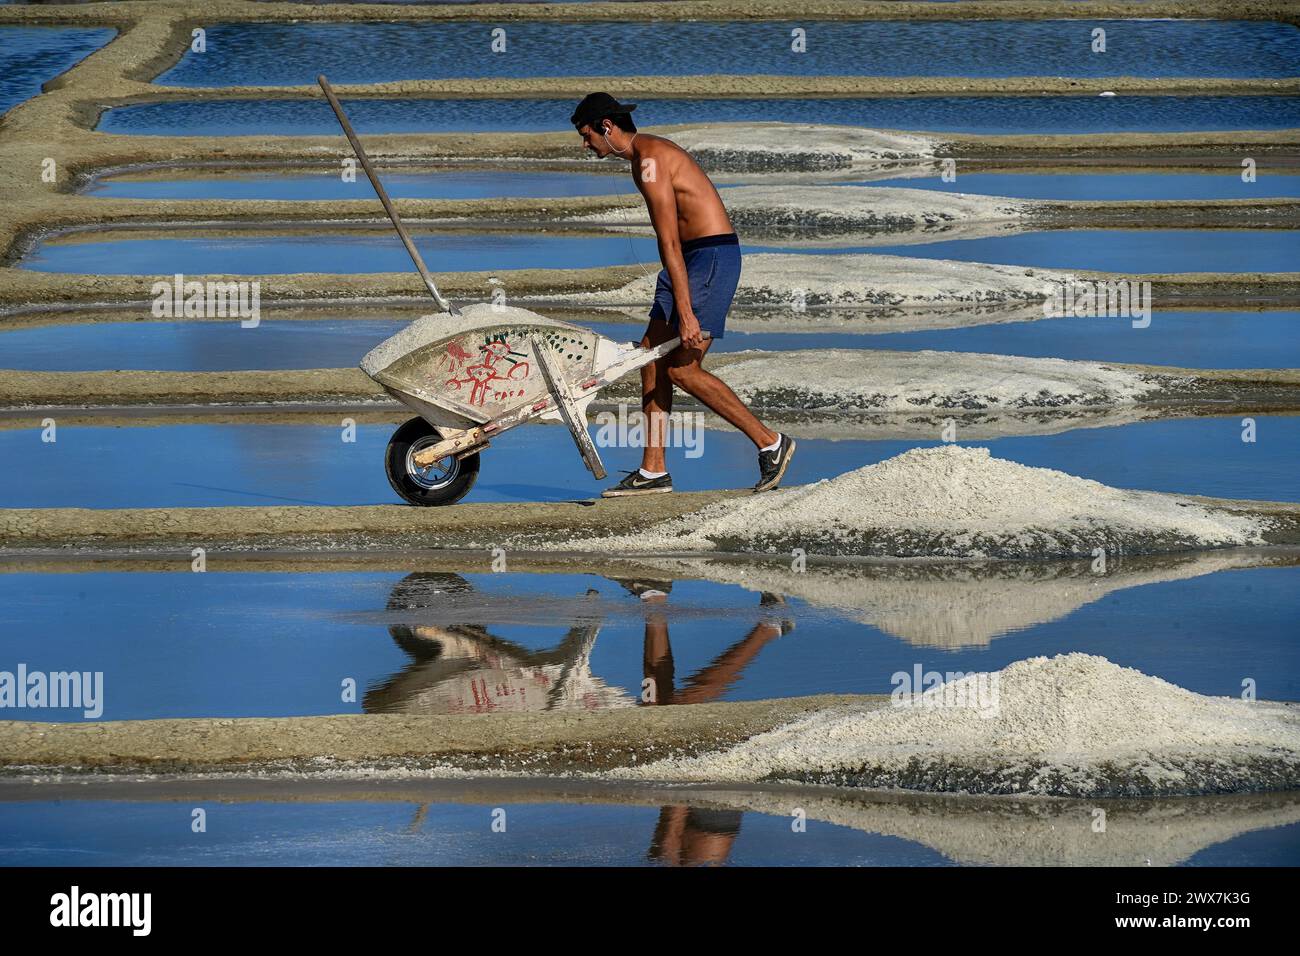 France, Brittany, A man extracting salt in Salants de Guerande Stock Photo